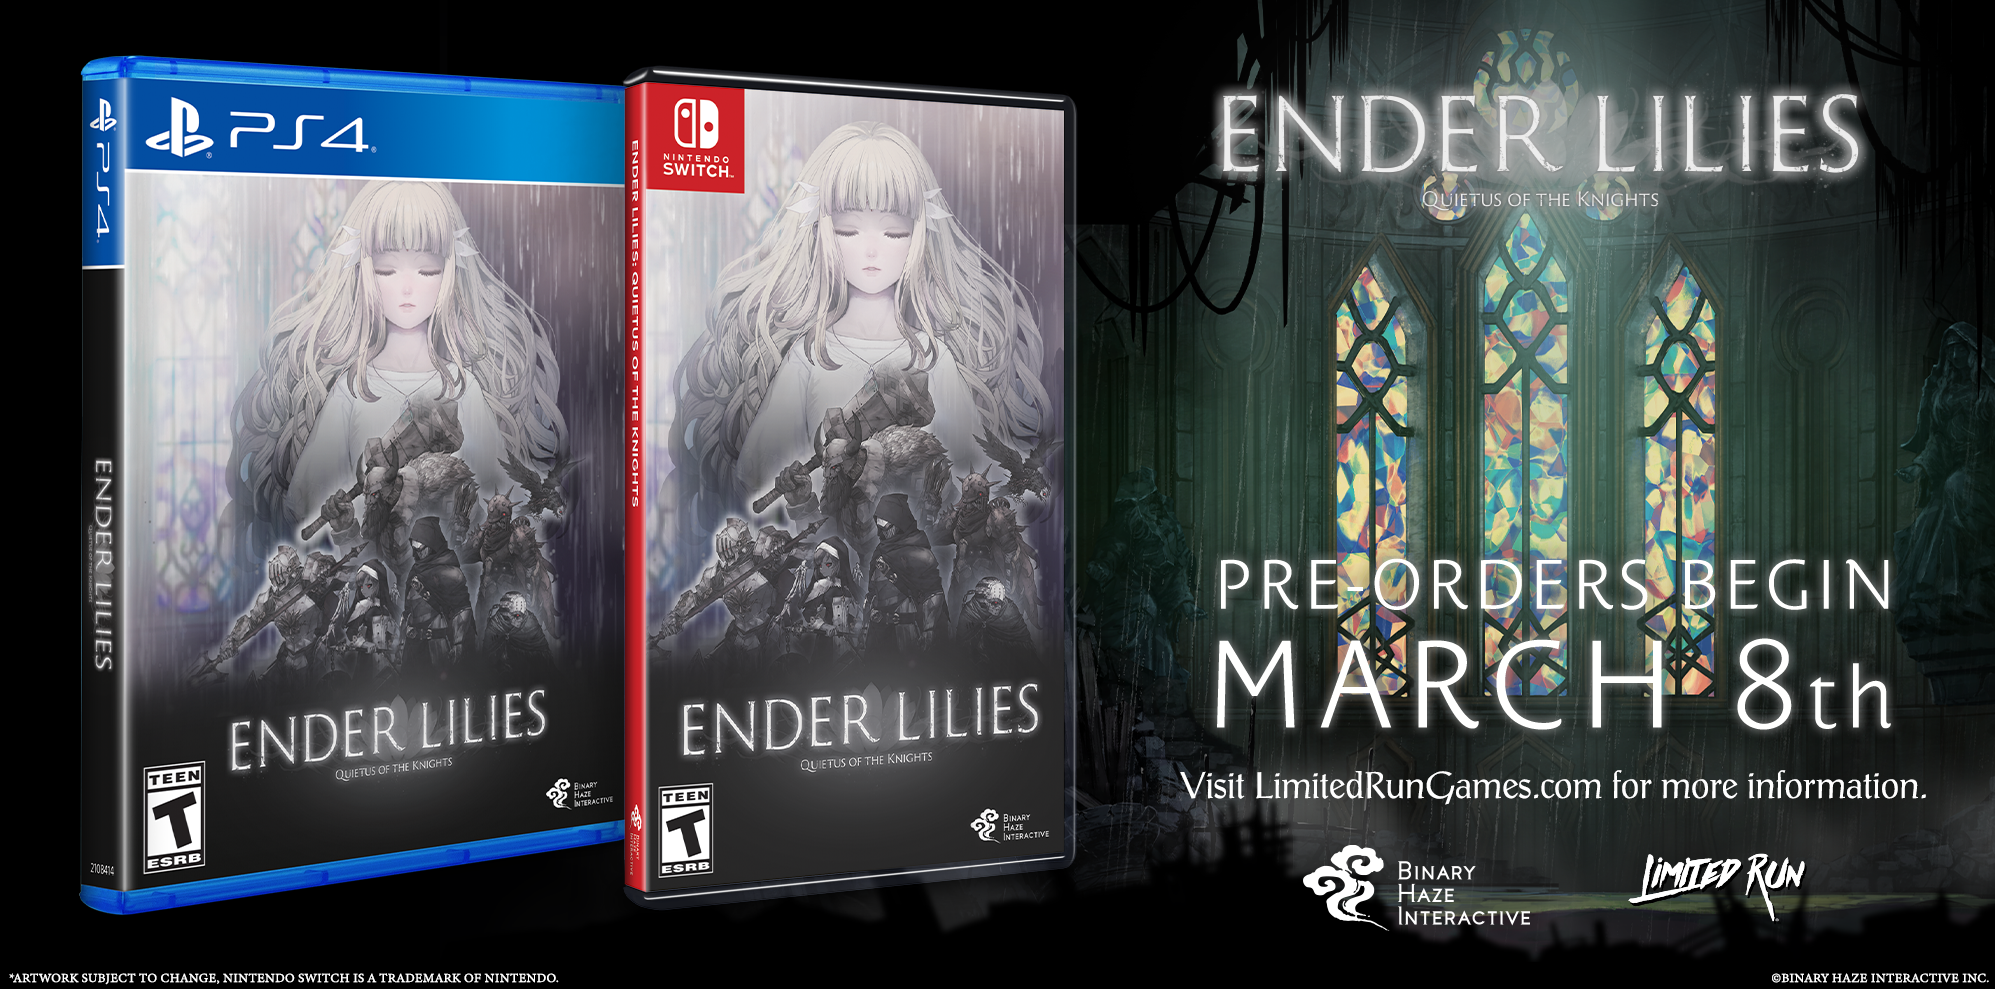 Ender Lilies: Quietus of the Knights Prices Nintendo Switch